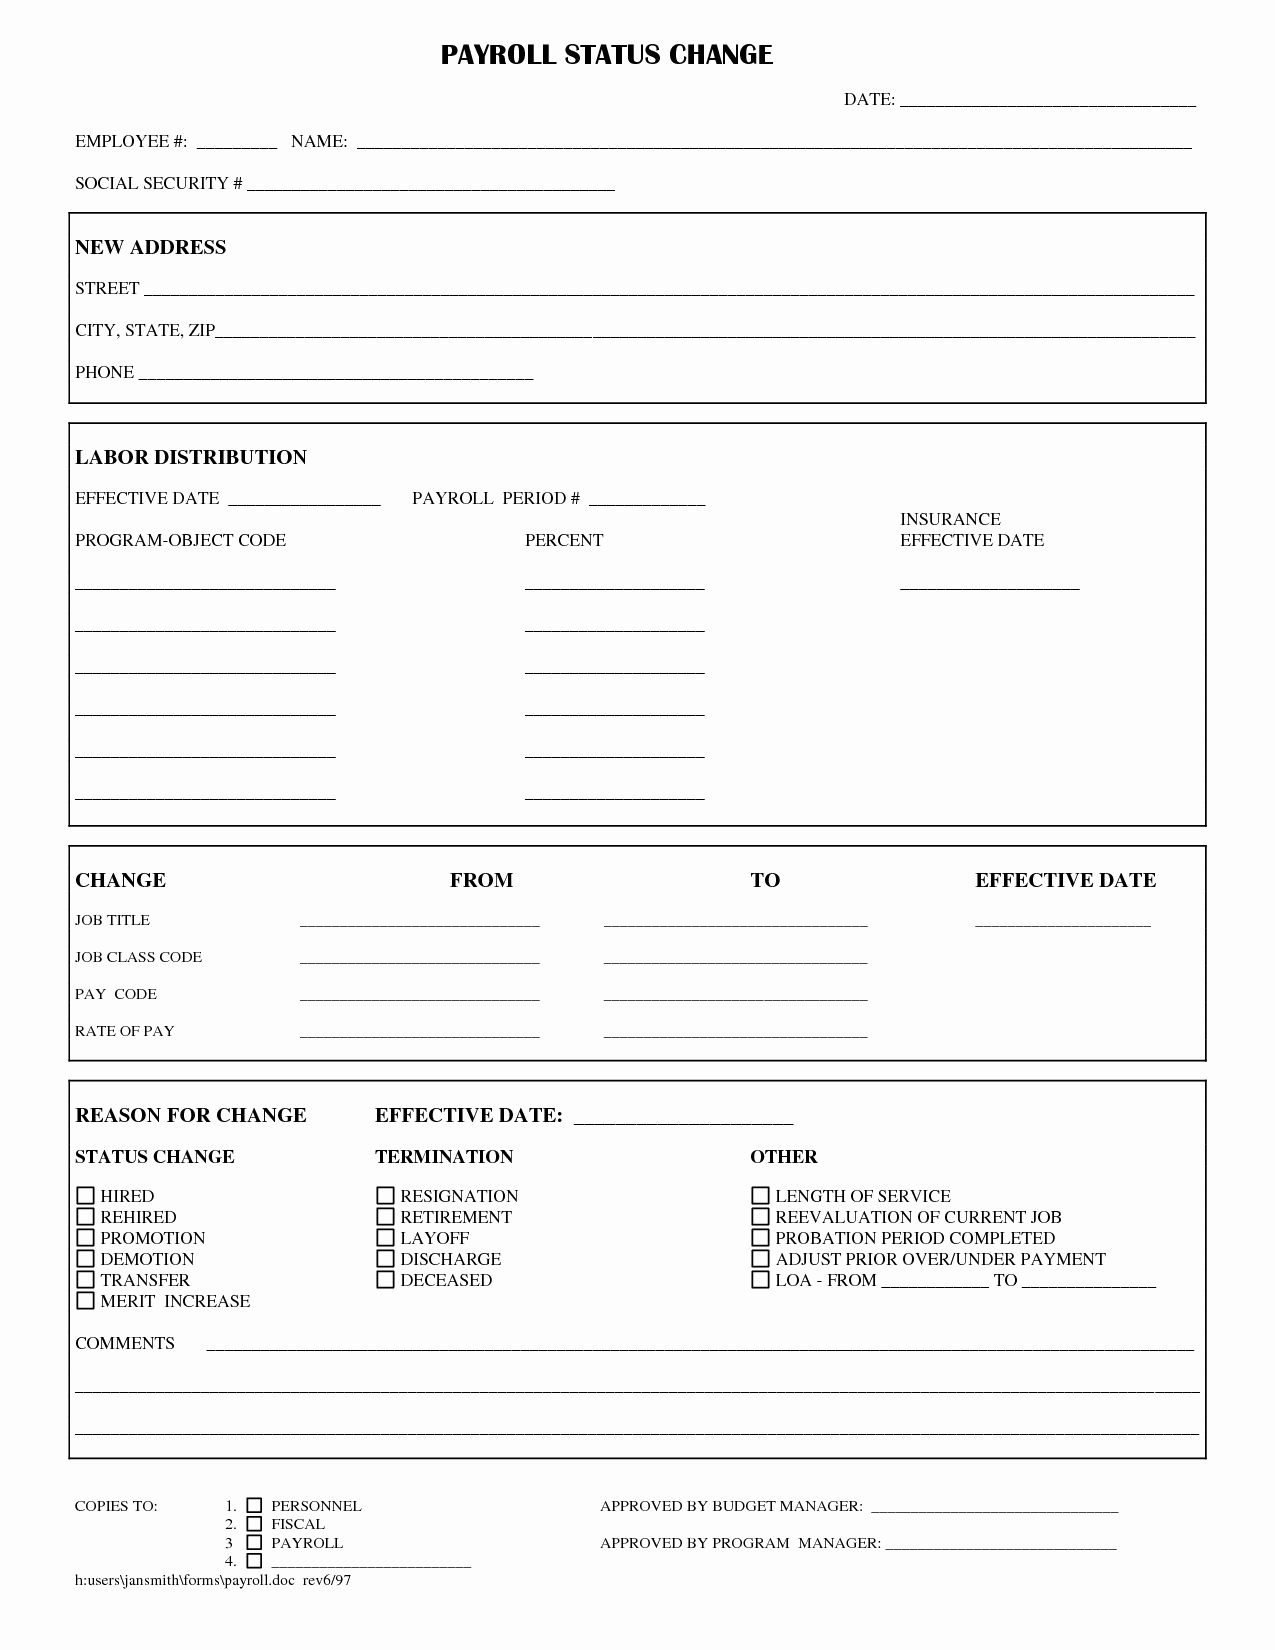 Employee Change form Template Lovely Employee Status Change forms Word Excel Samples